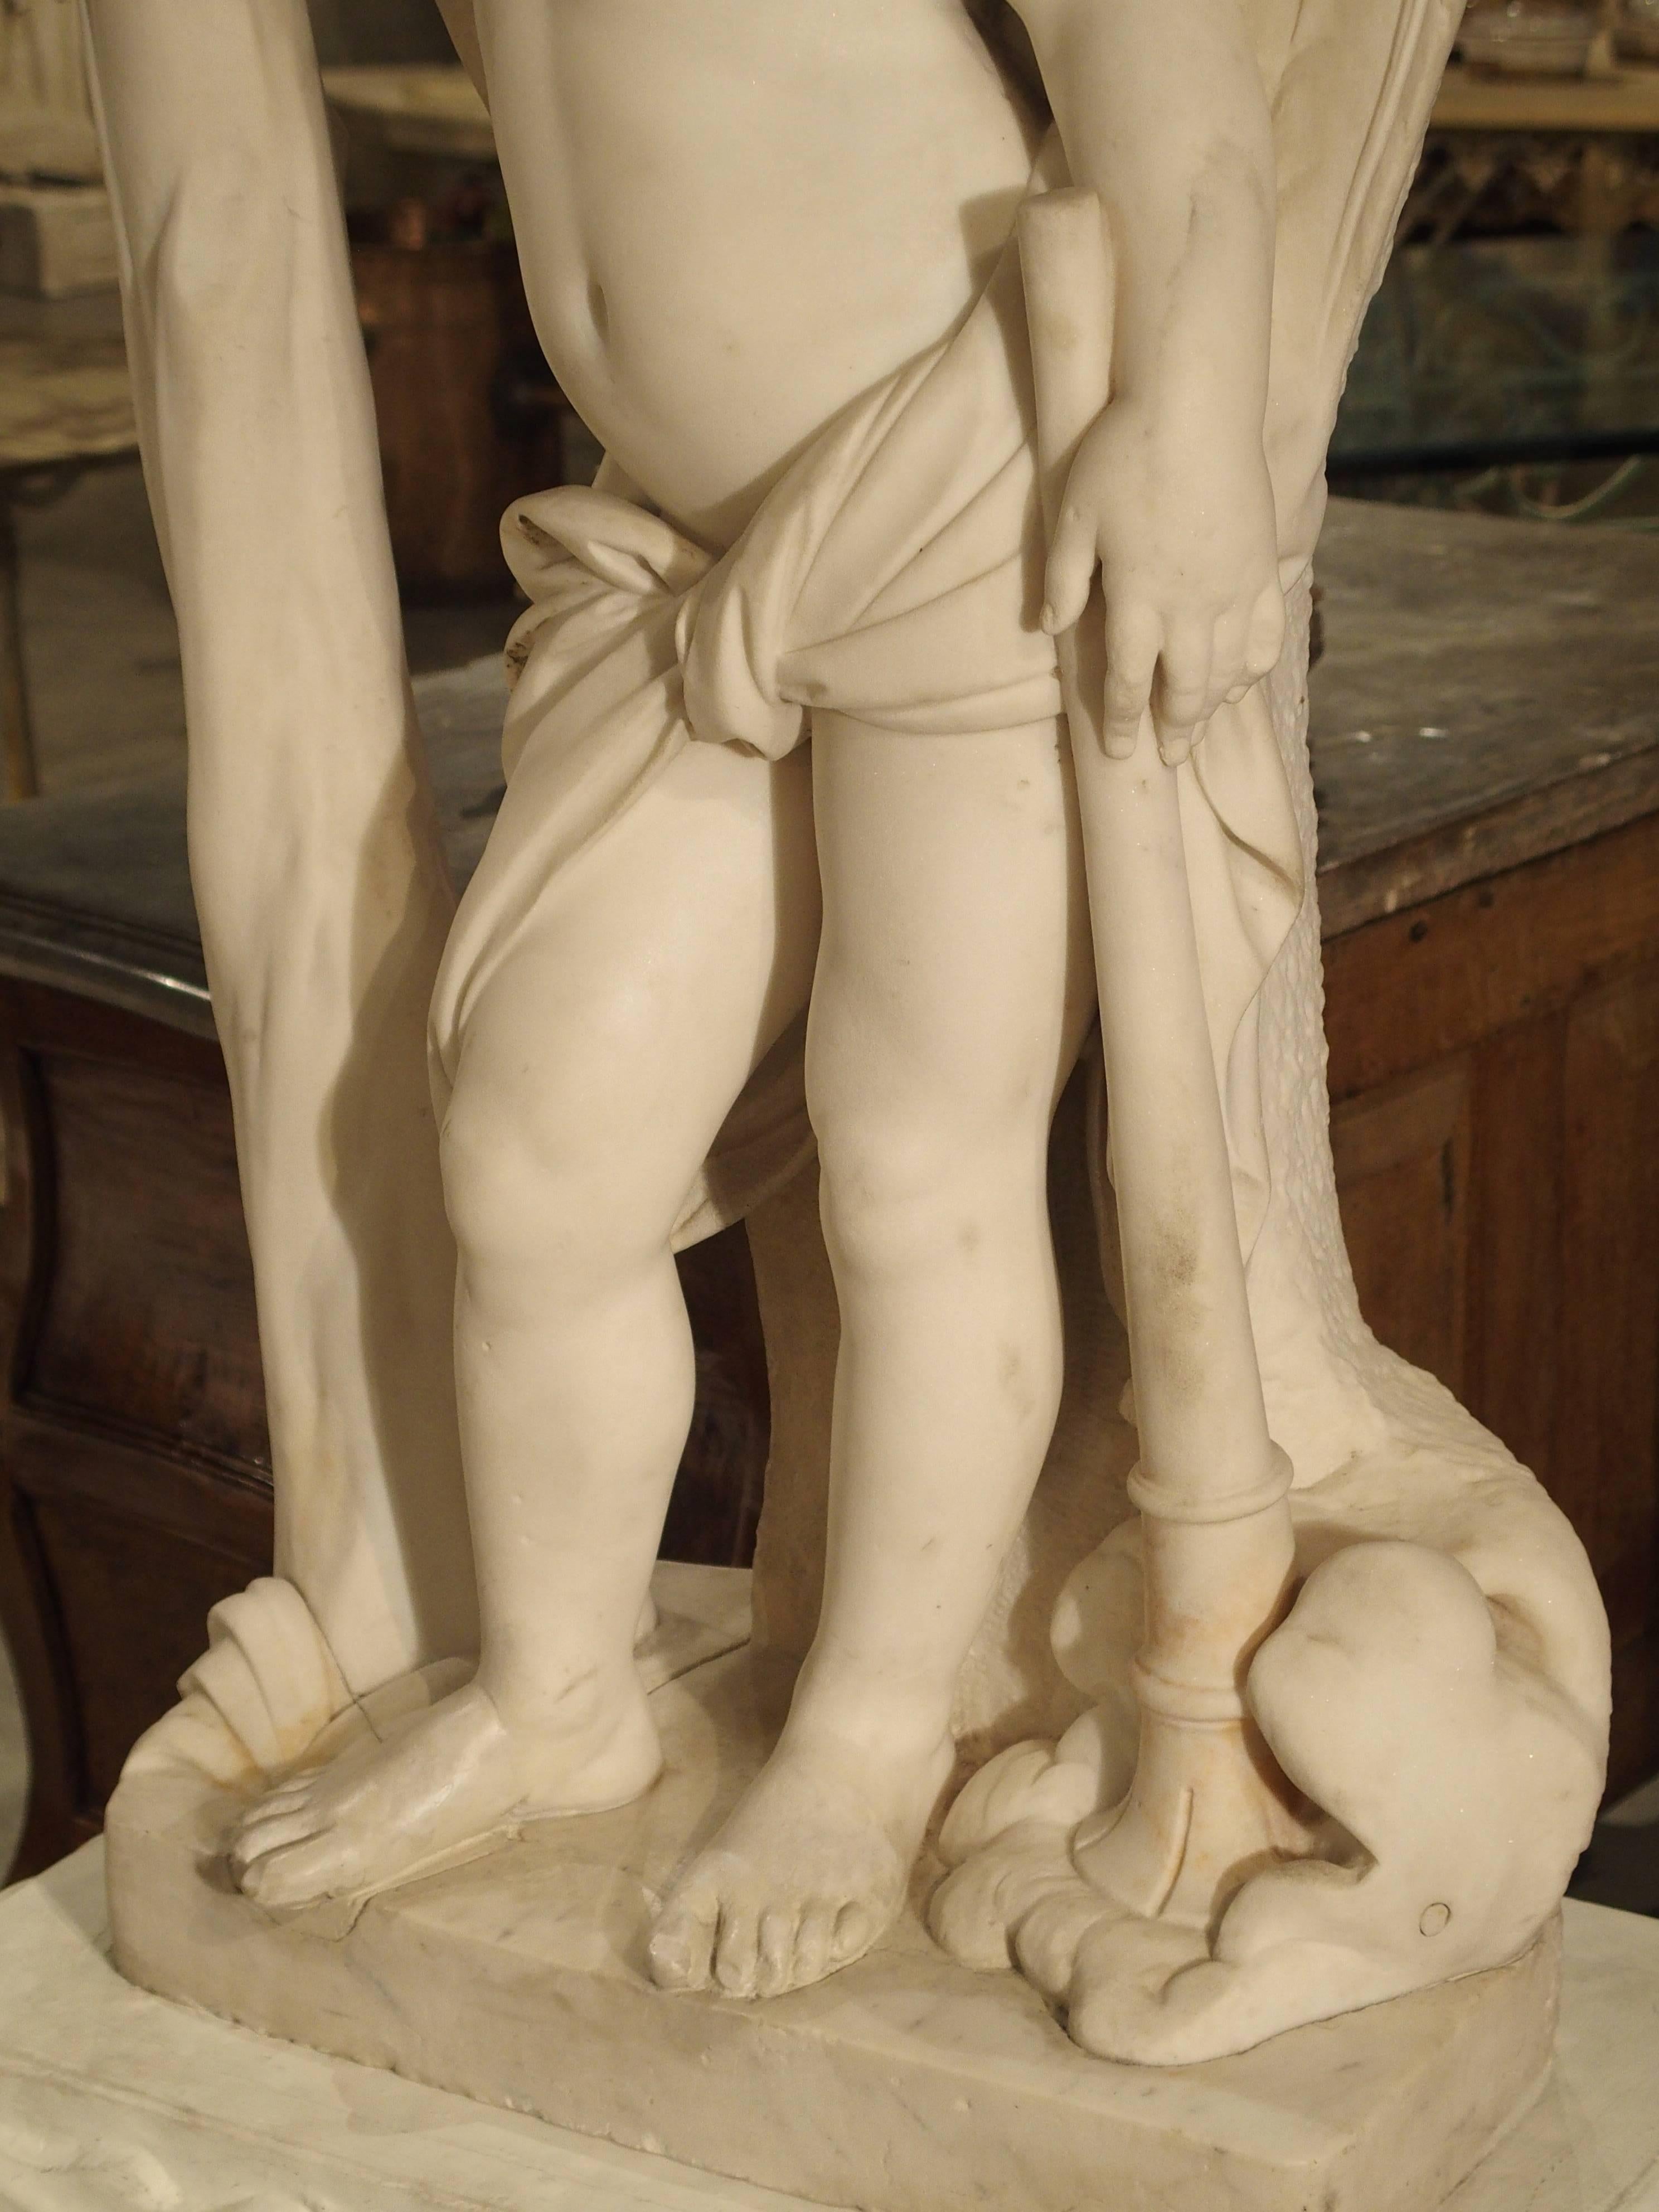 This beautiful antique marble statue from Italy depicts a musical cherub with his trumpet resting in a cloud. He appears to be taking a rest or time out from his usually busy musical activities. His right arm is supporting his head, while his eyes